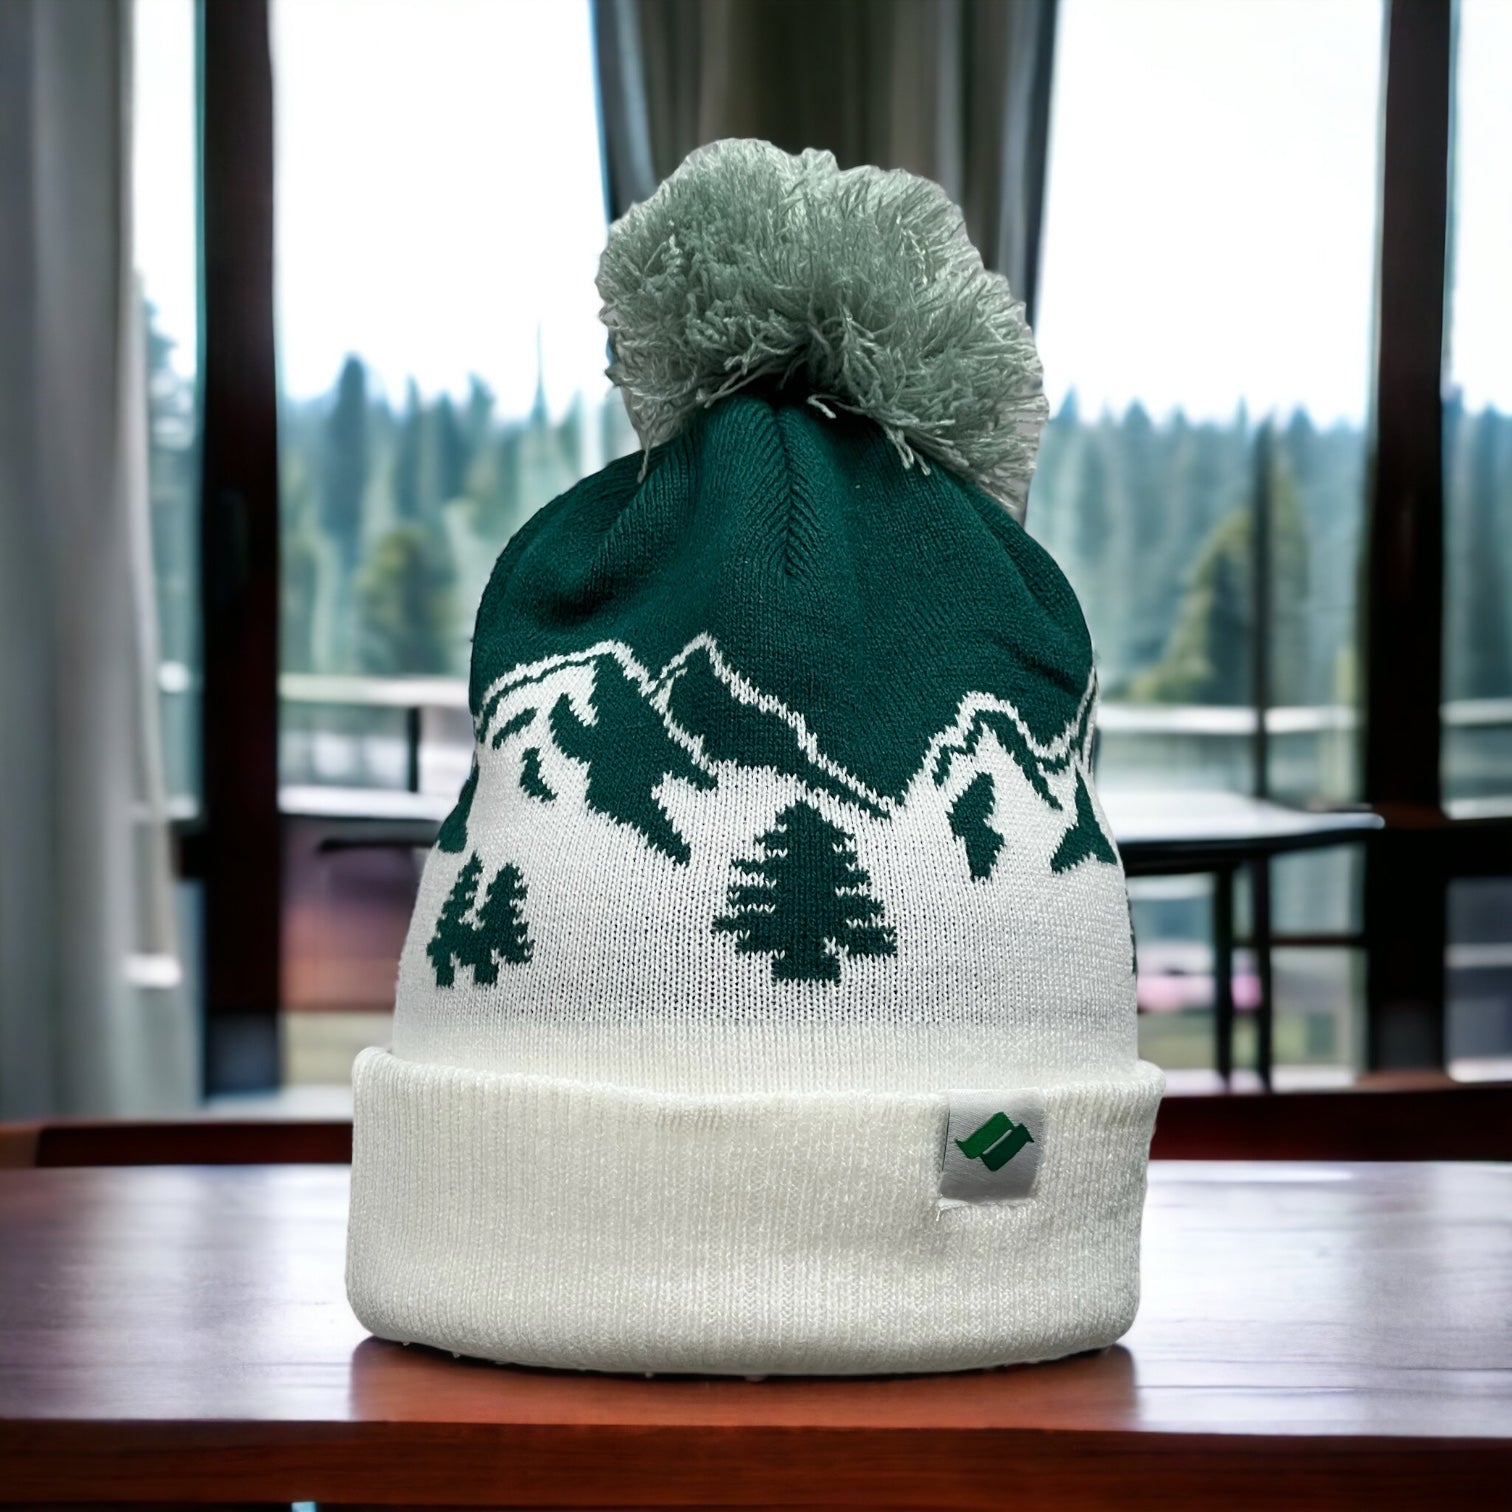 Green and White with mountain scape. Snow Summit tag on the left corner.